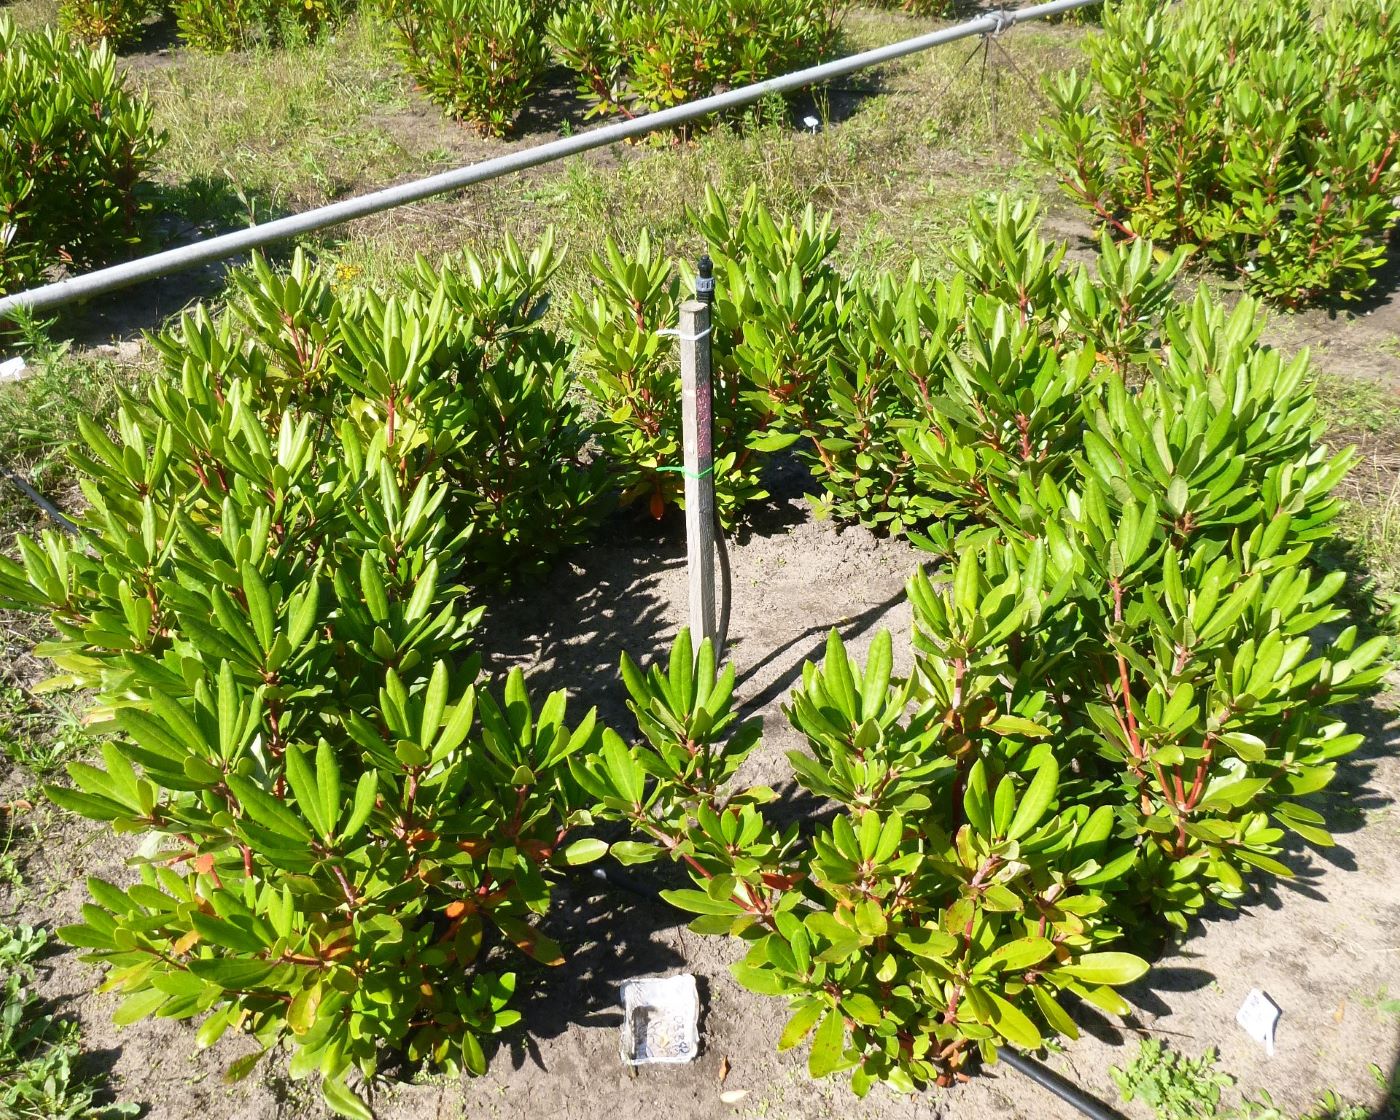 A view of a rhododendron, and the field experiment used in this research.